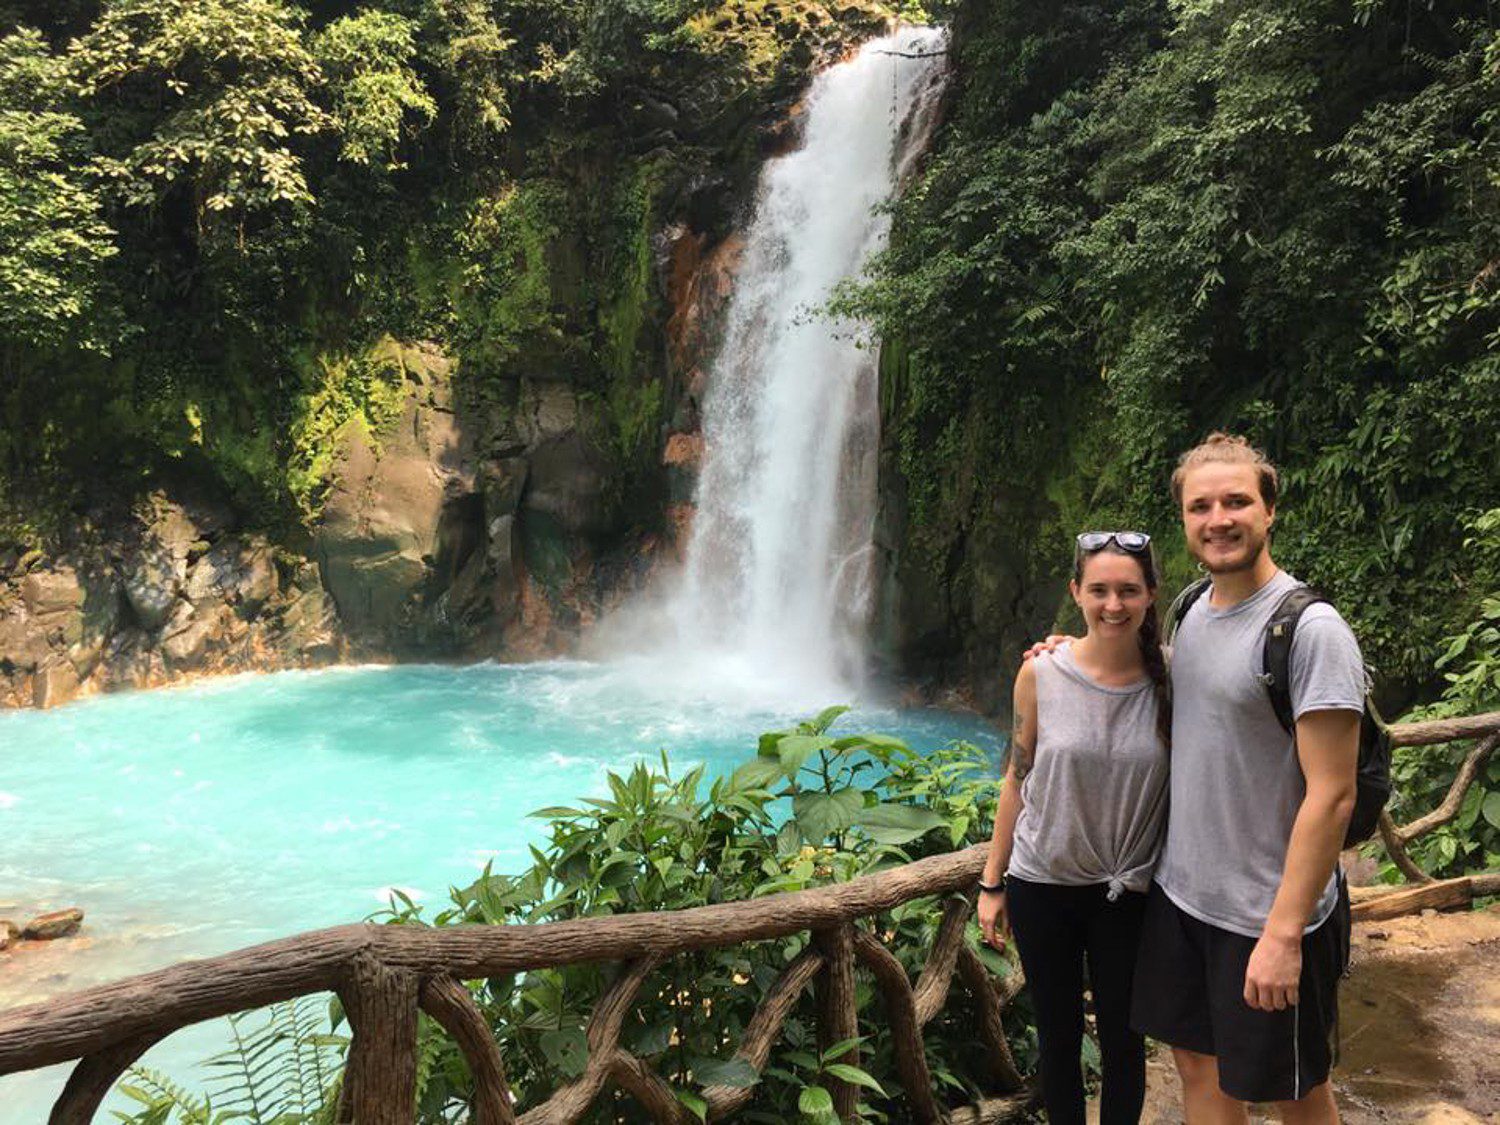 With a beautiful waterfall in Rio Celeste, Costa Rica.